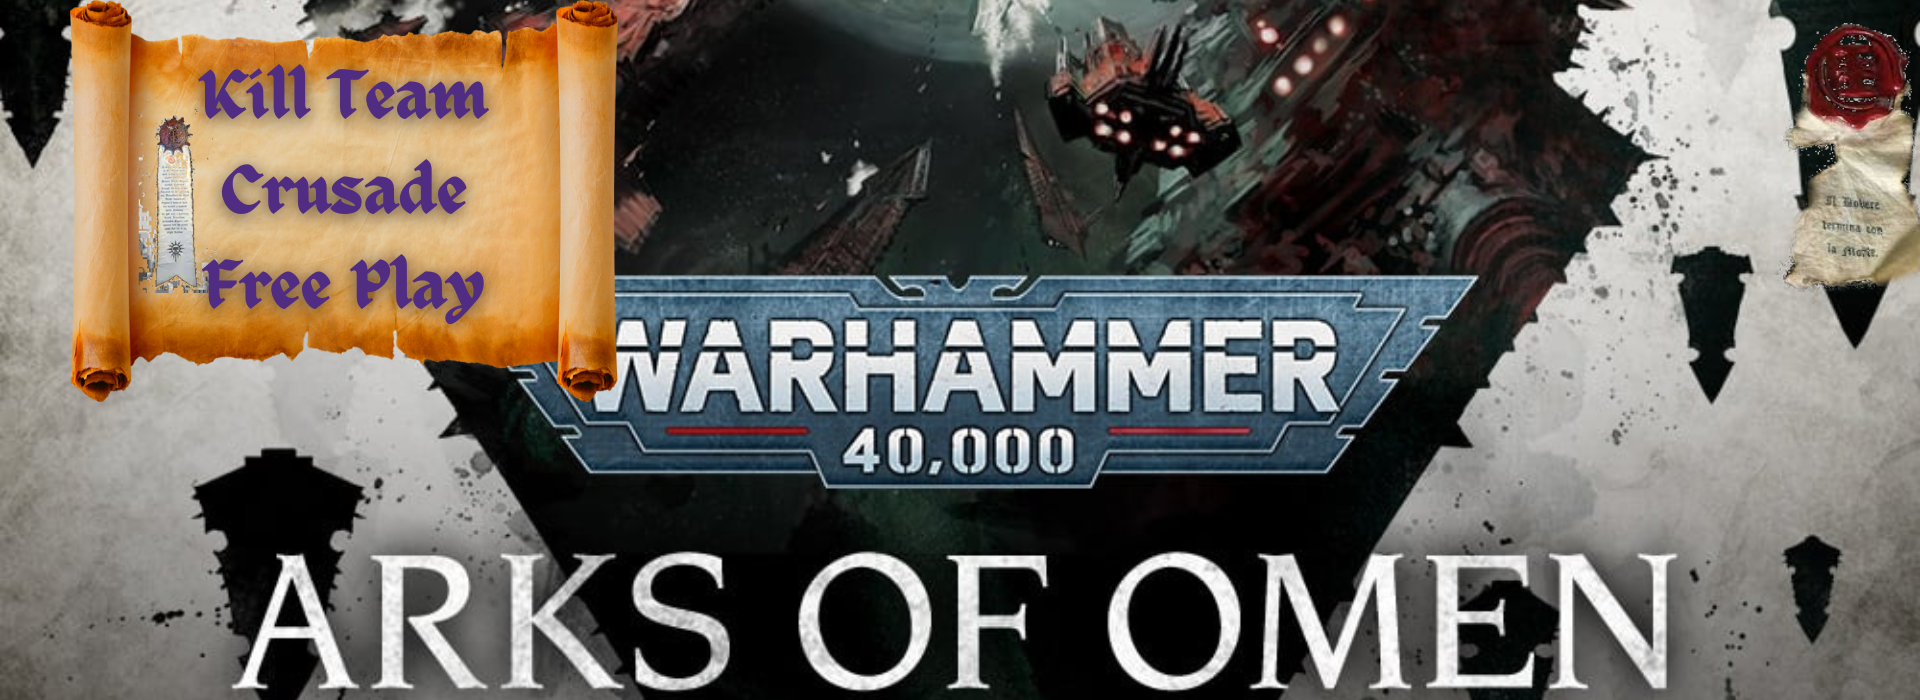 An advertisment for weekly in-store Warhammer play